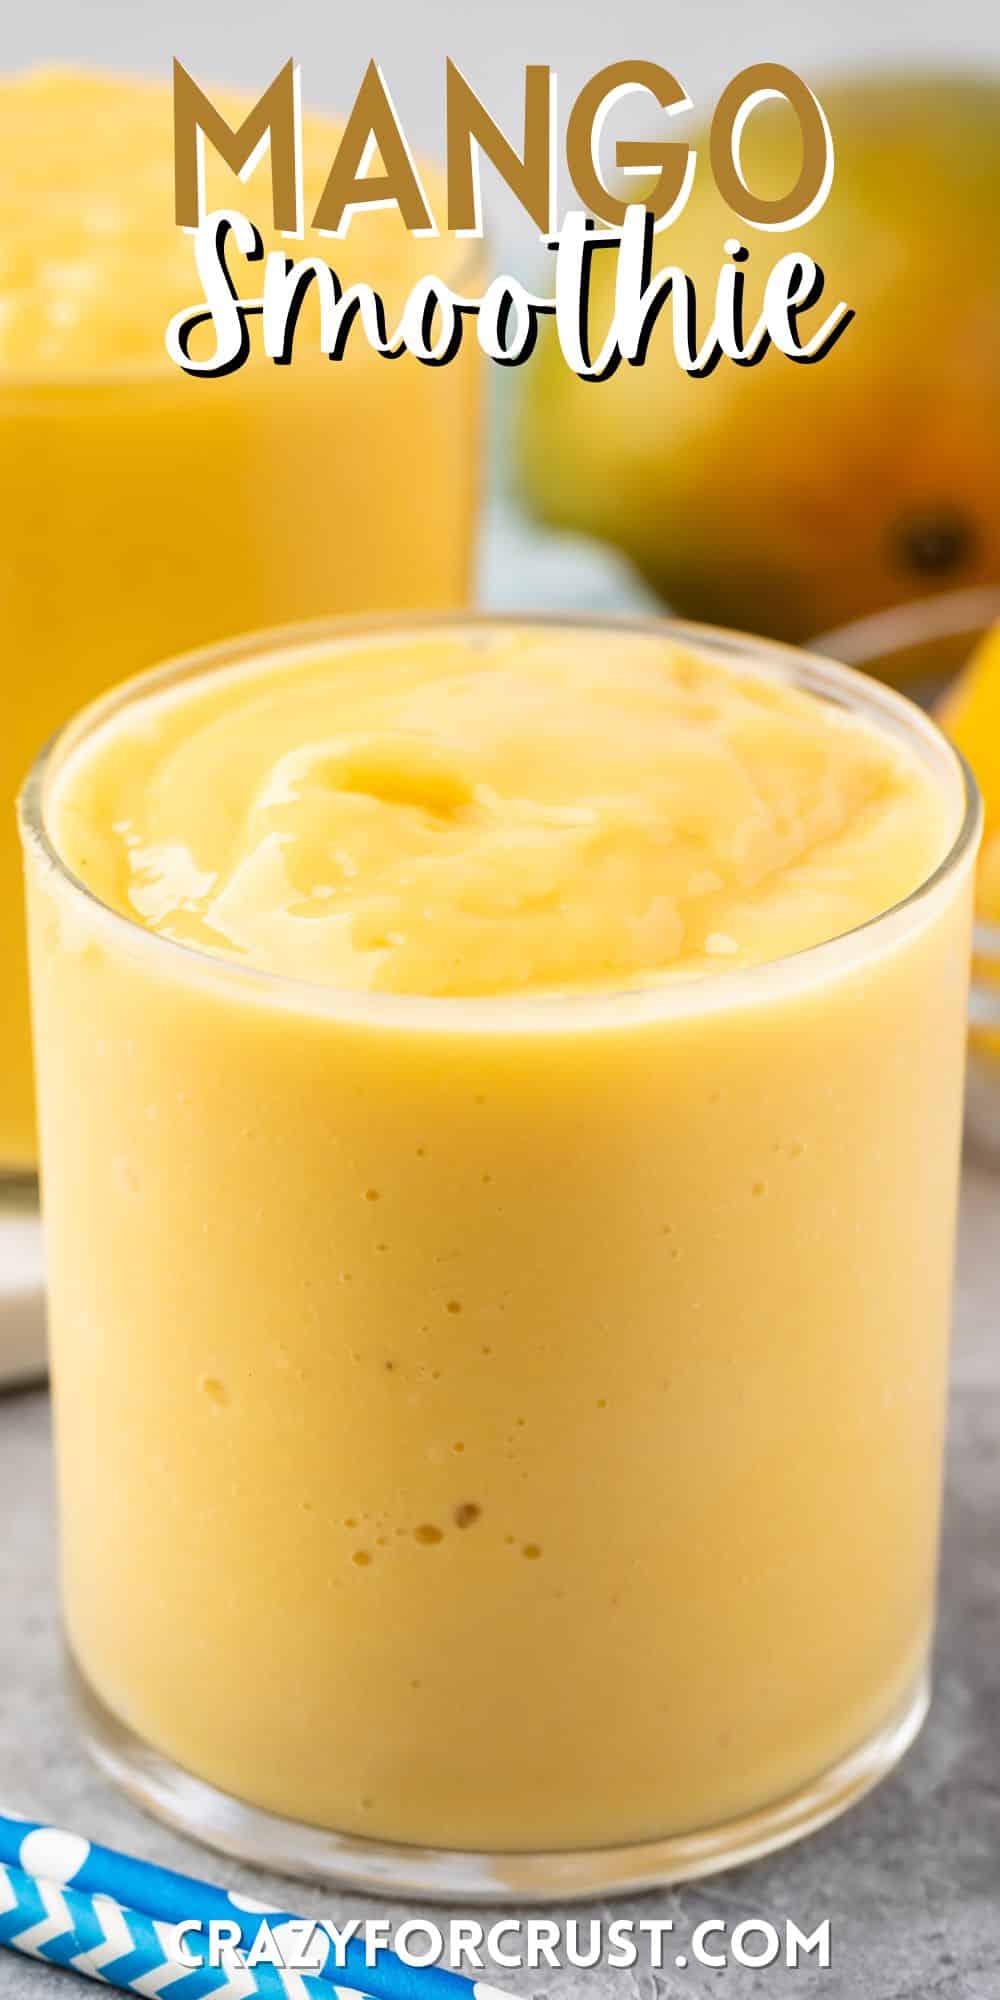 mango smoothie in a short clear glass with words on the image.